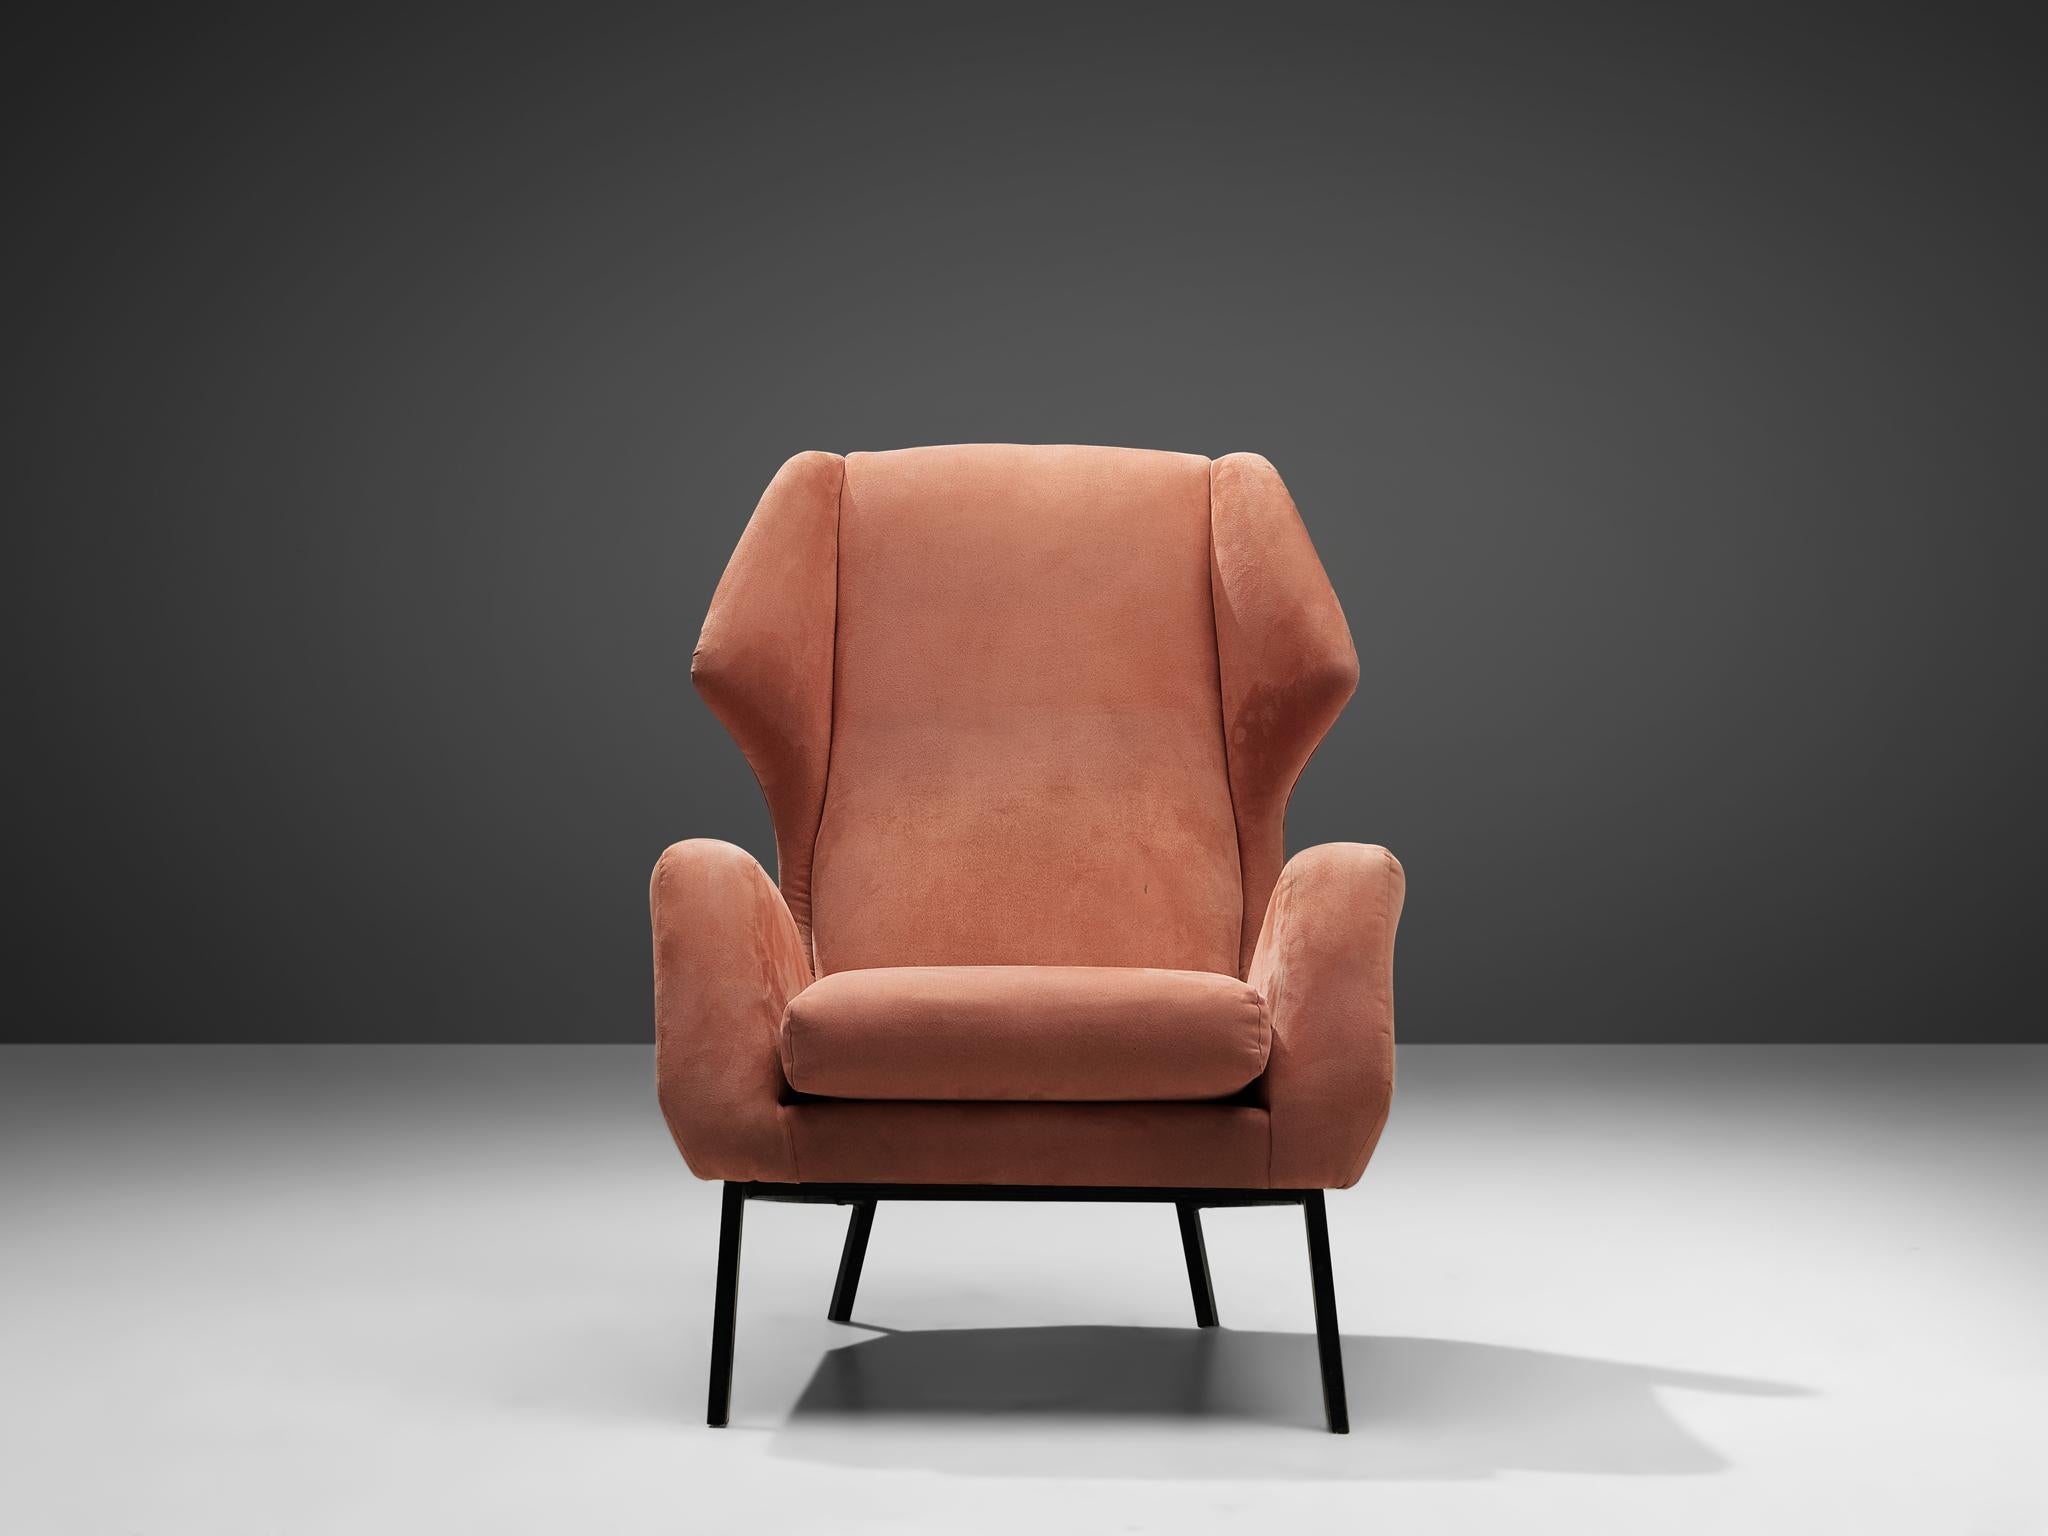 Italian Wingback Chair in Salmon Pink Upholstery